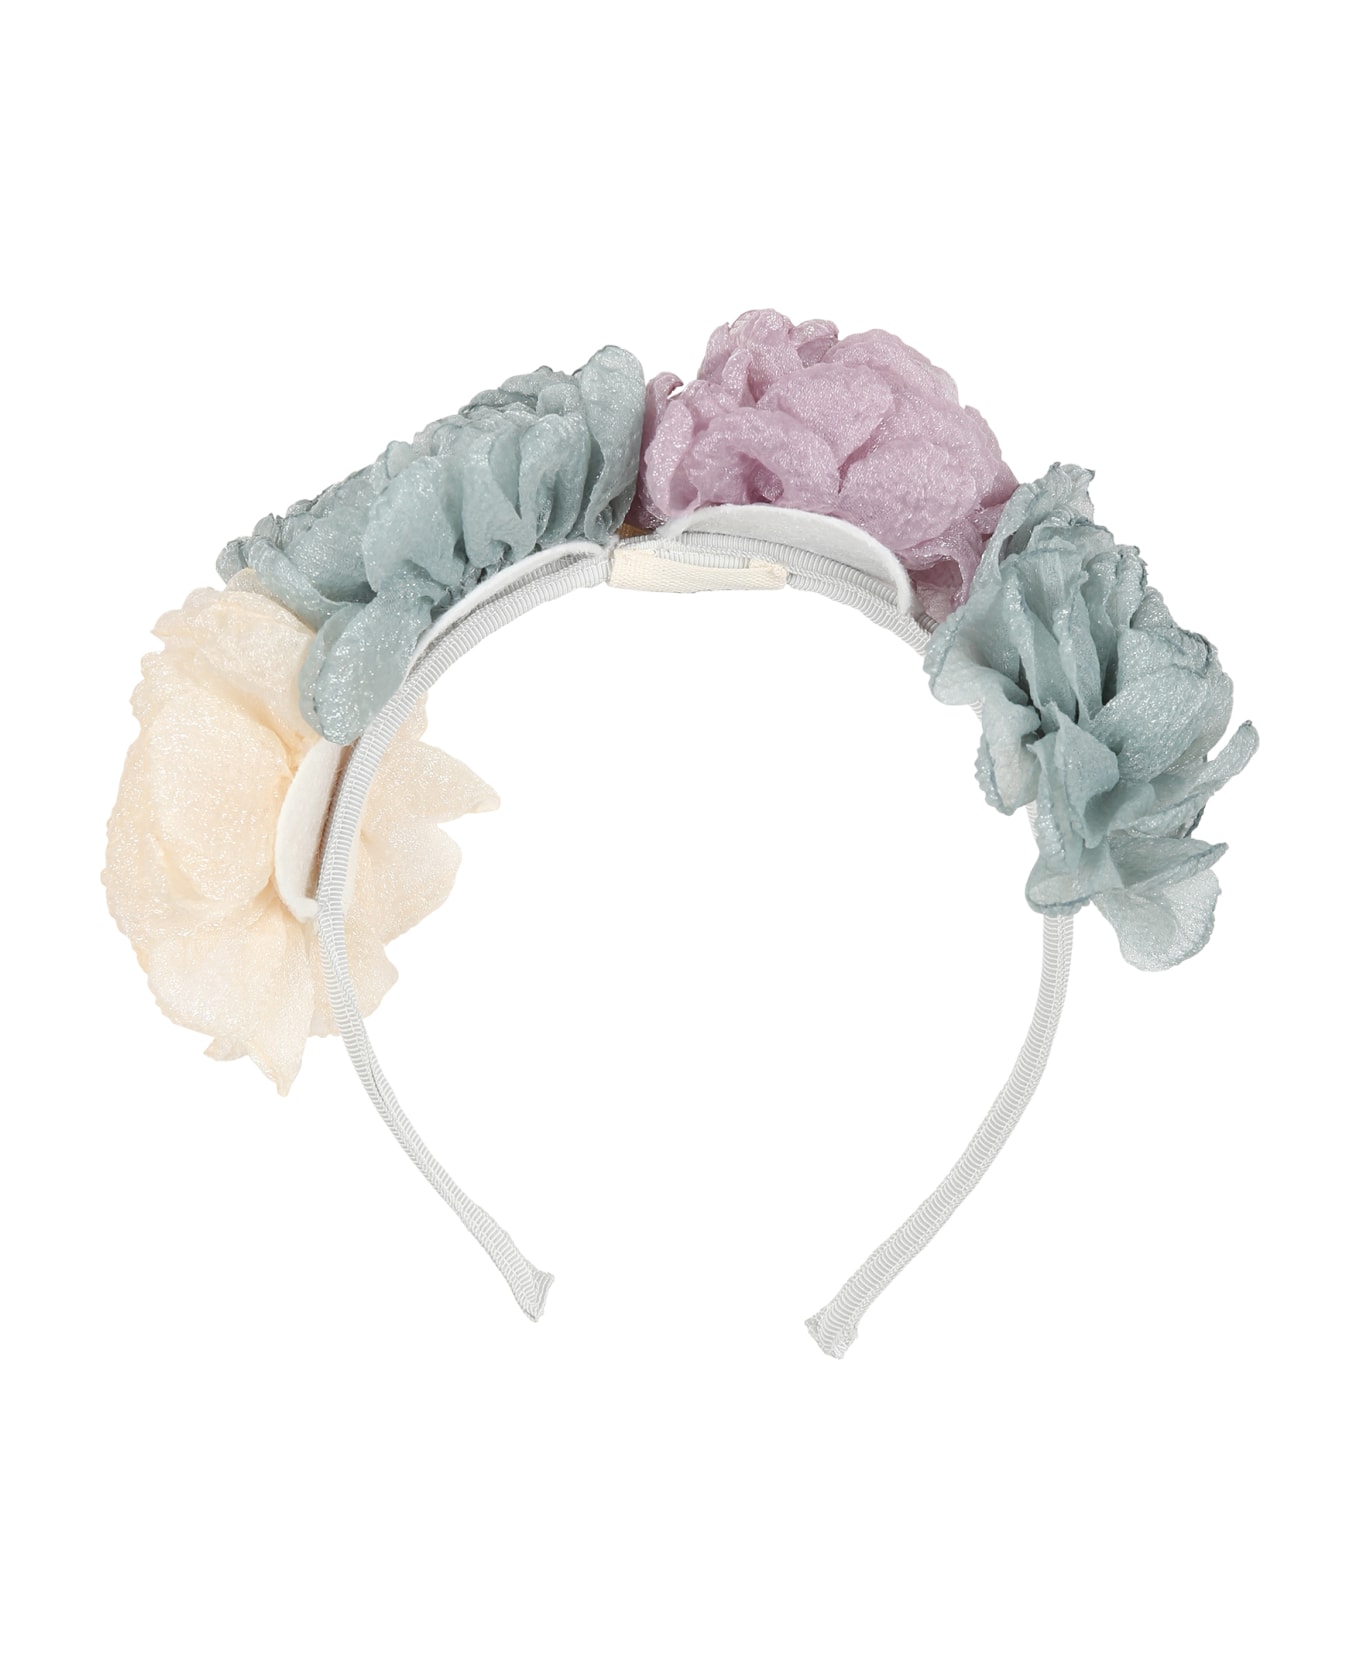 Caffe' d'Orzo Multicolor Headband For Girl With Roses - Multicolor